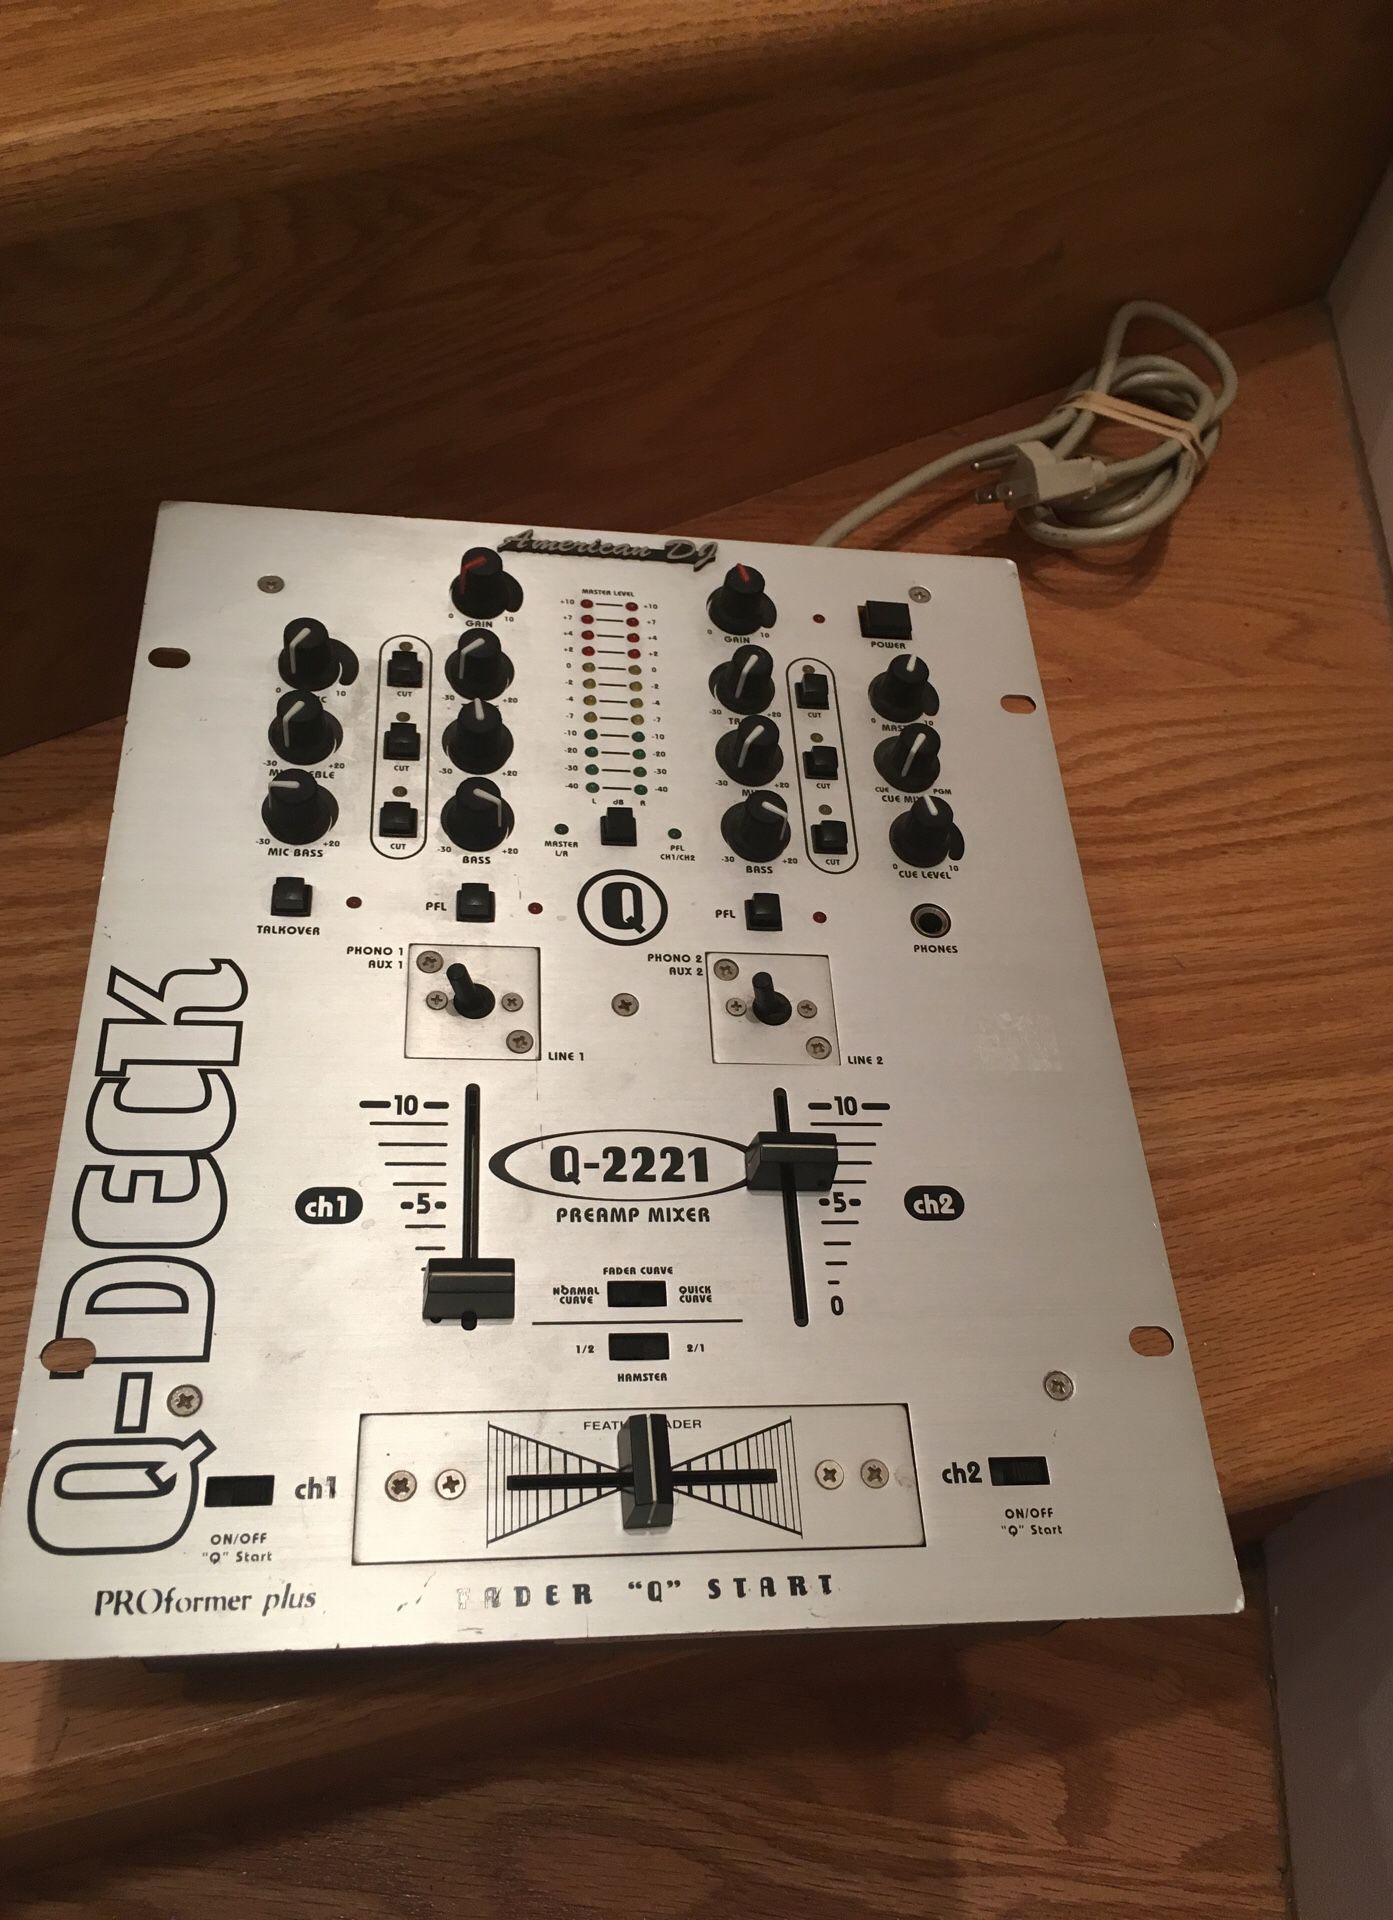 American DJ mixer with two Channels